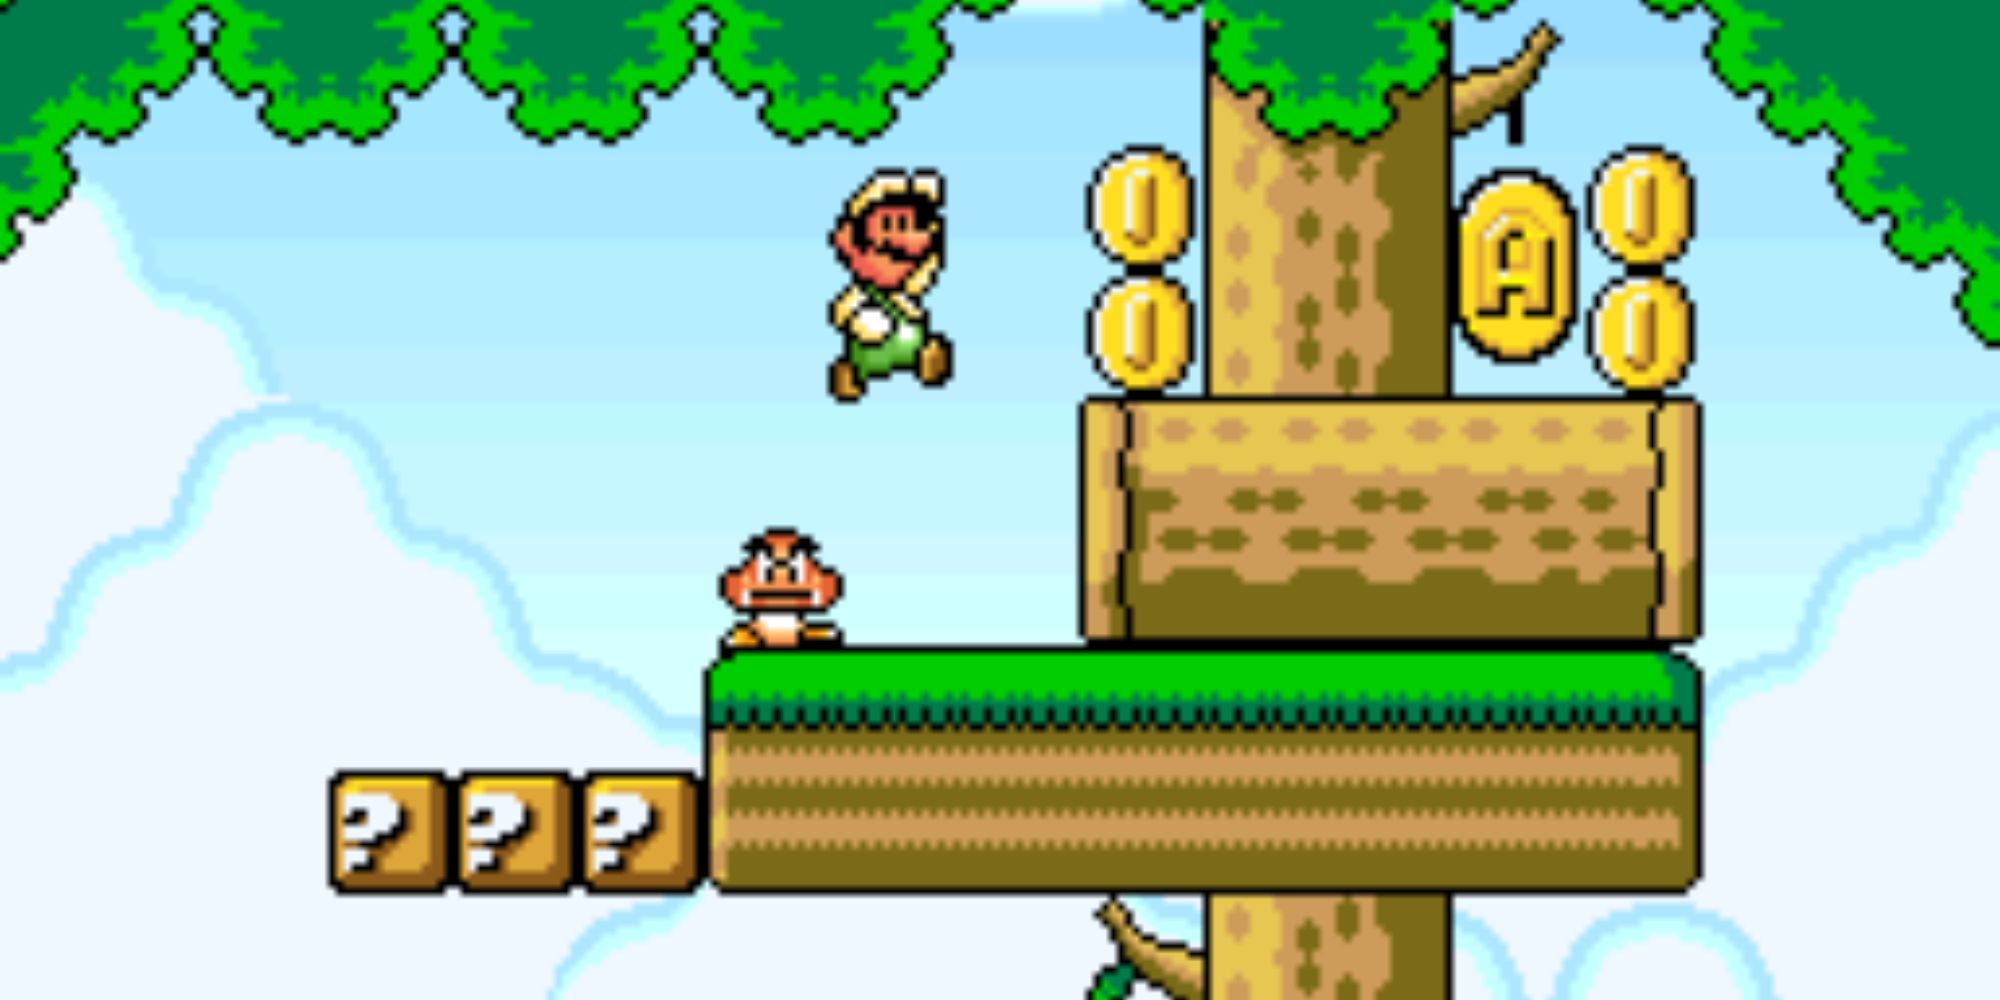 Luigi hopping over a Goomba in a forest